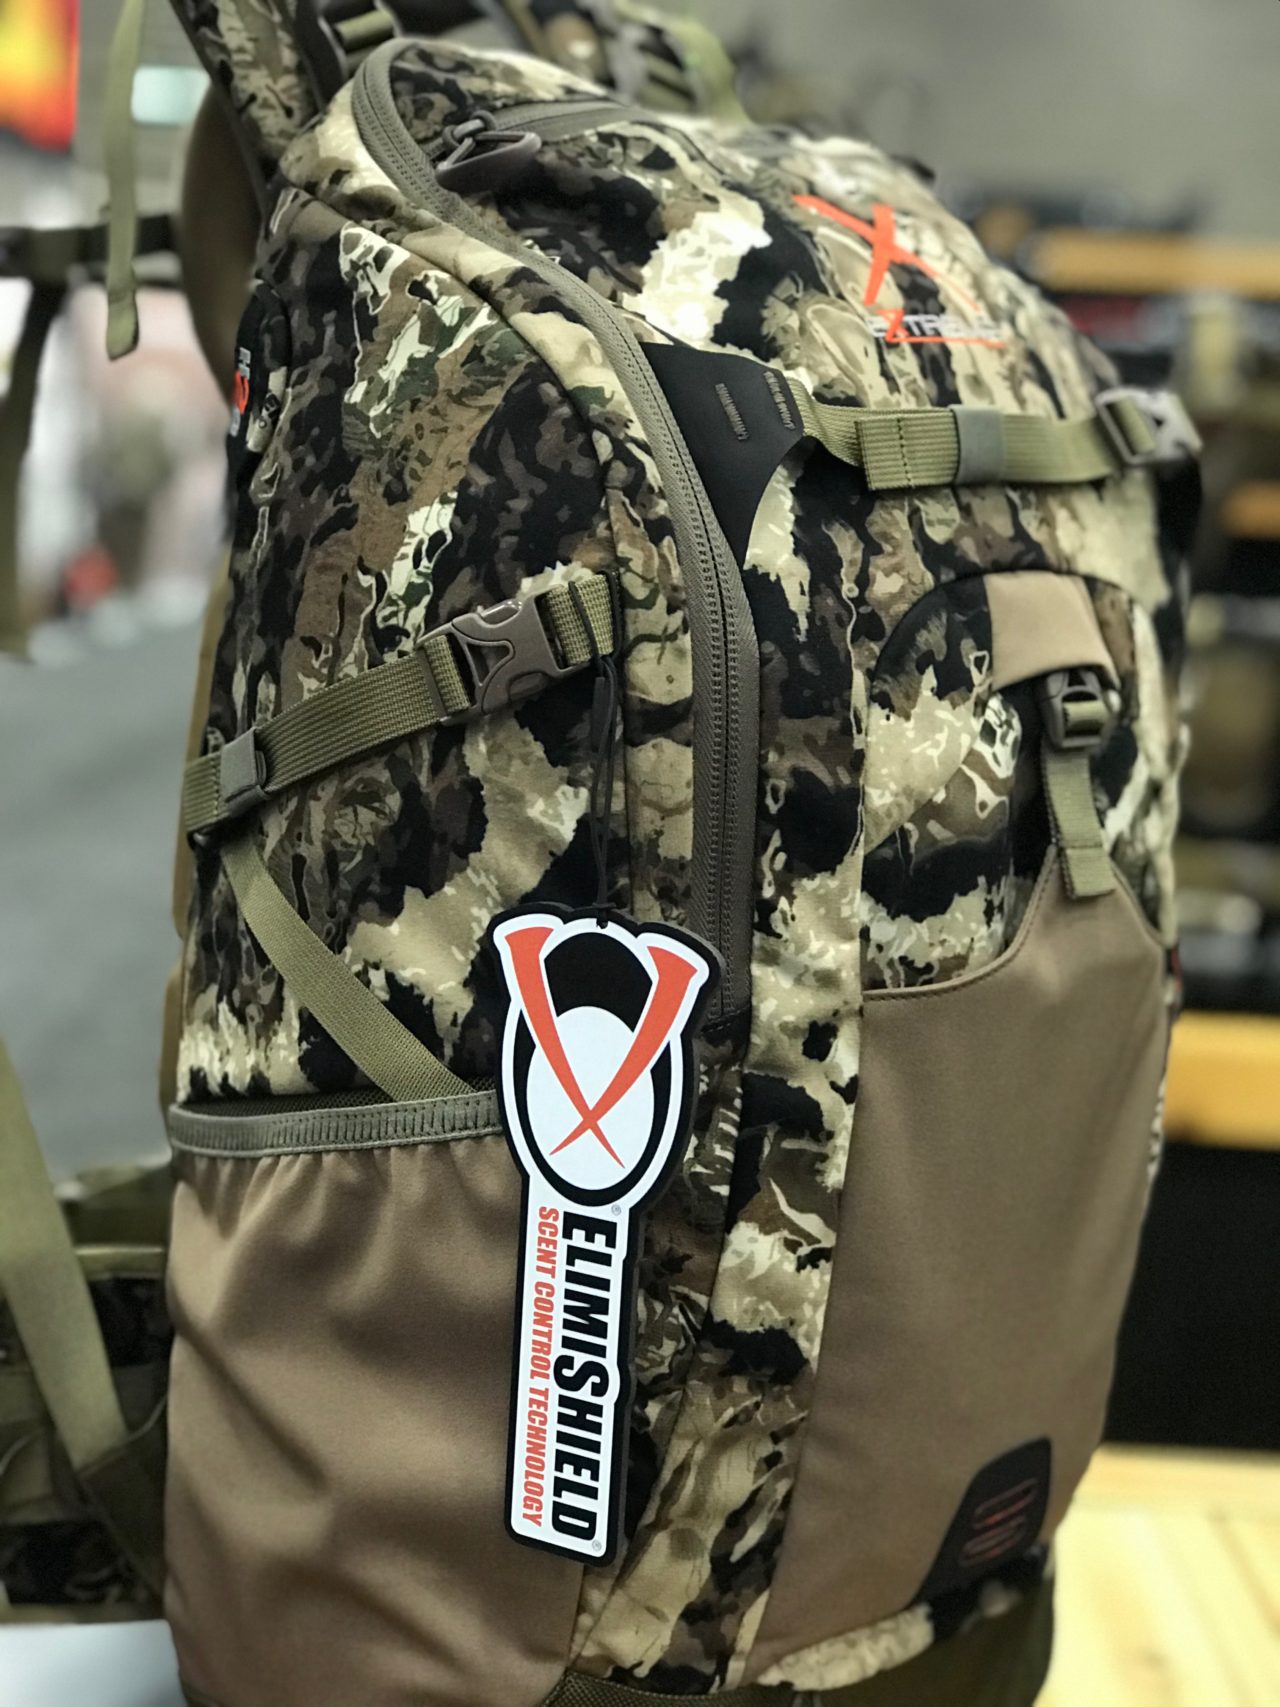 ALPS OutdoorZ to Include ElimiShield® in Extreme Series Packs